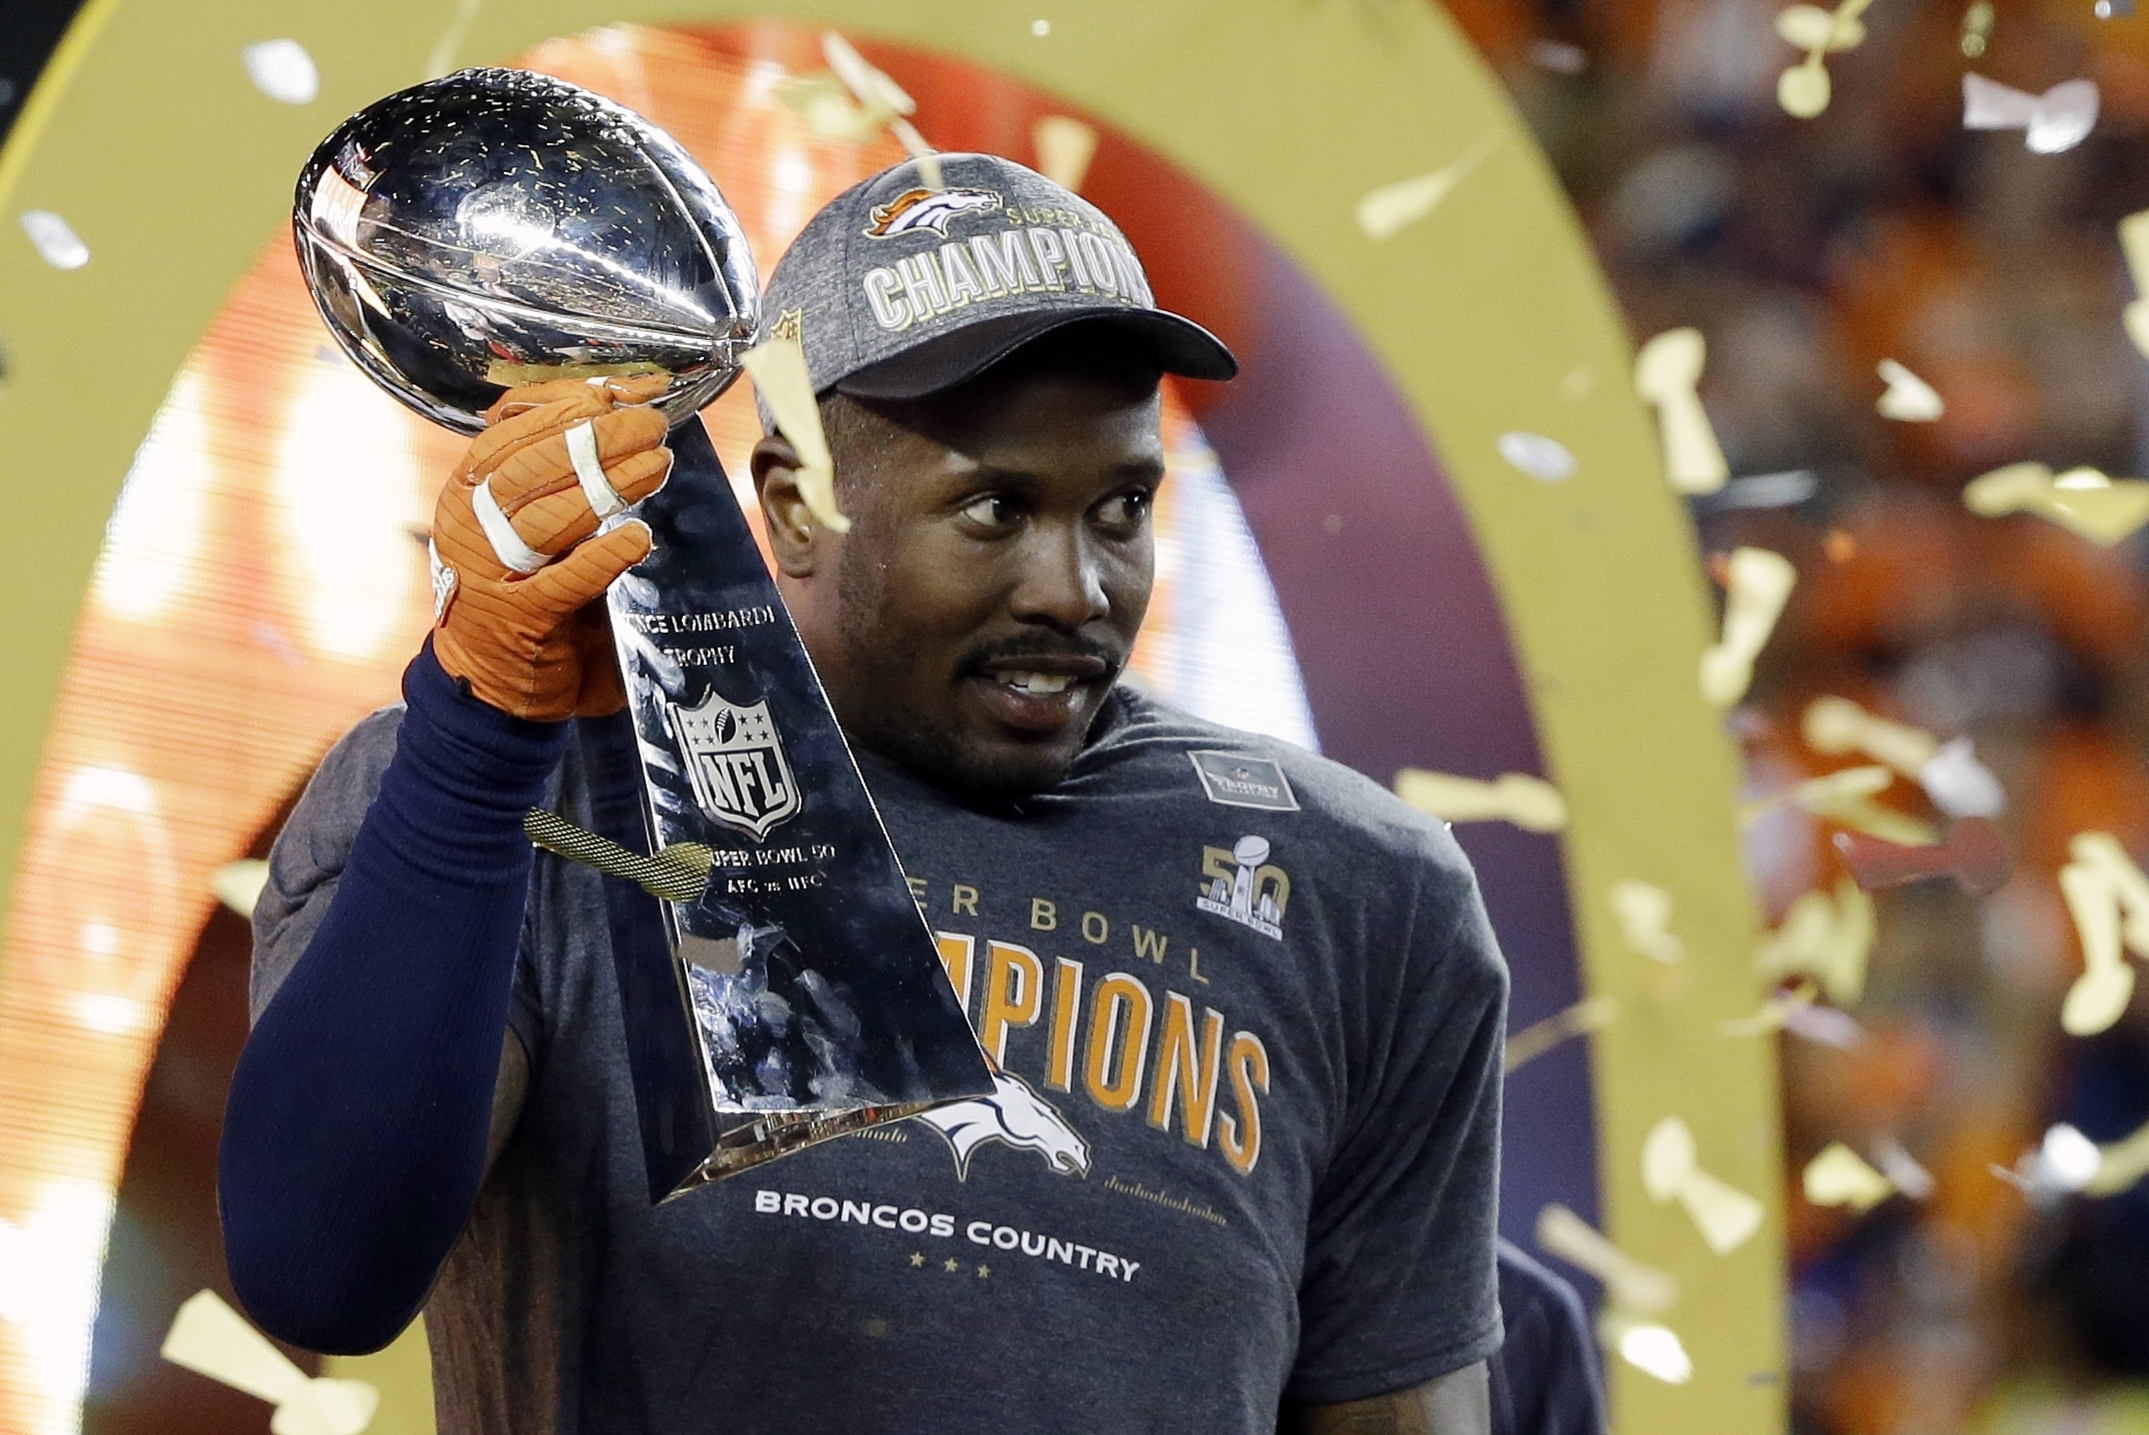 Broncos to honor first Super Bowl-winning team's 25th anniversary in  October – The Denver Post